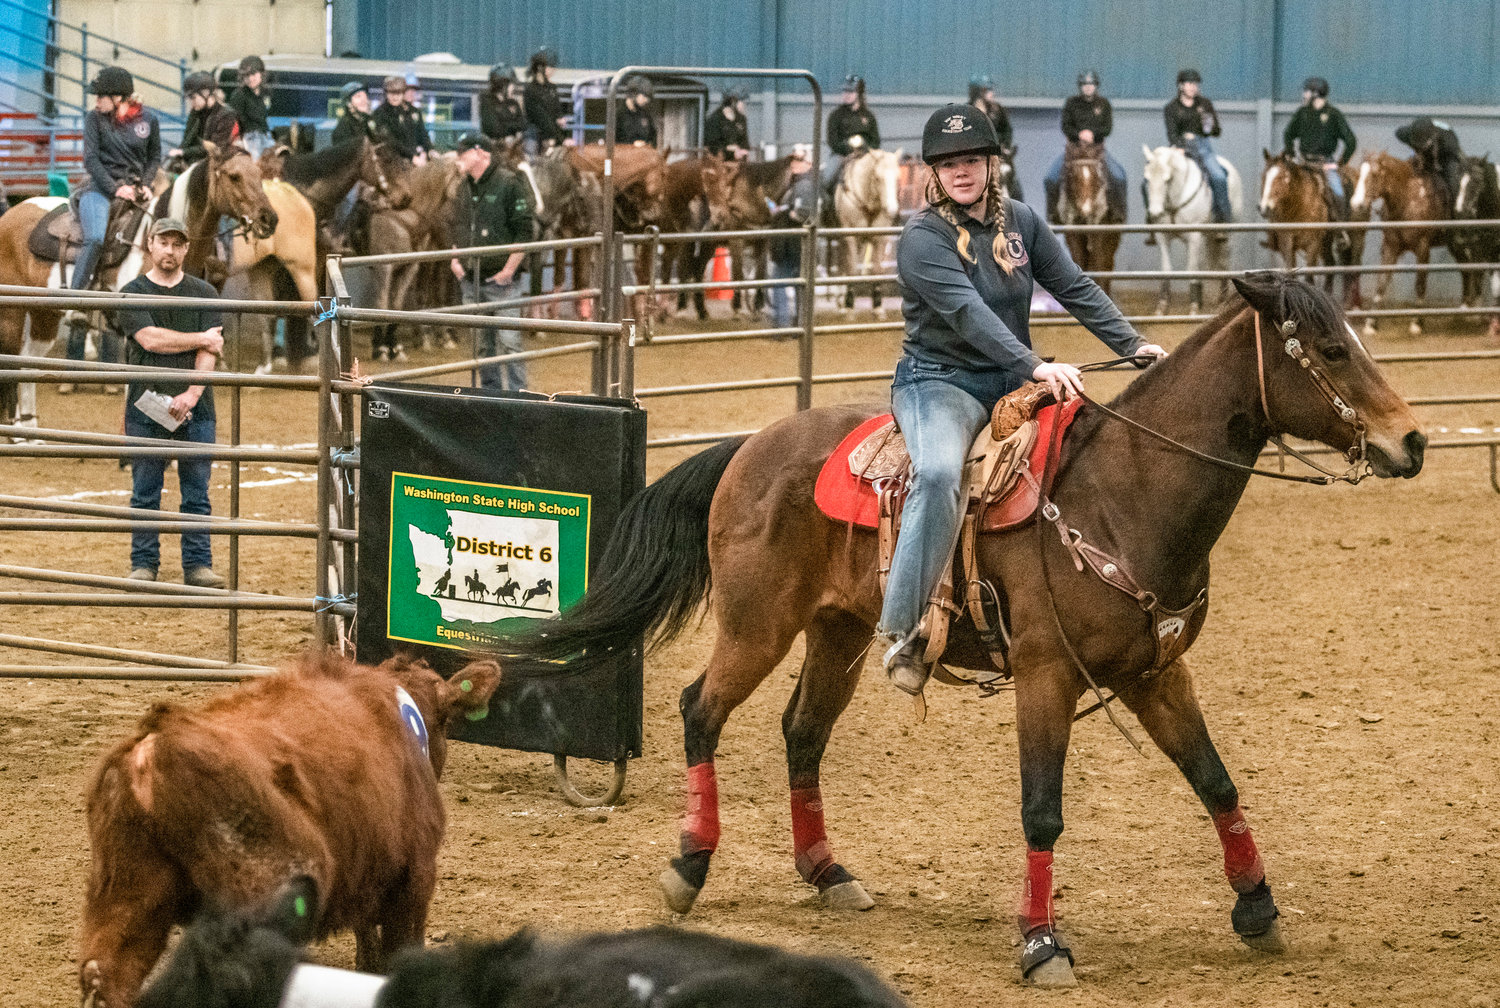 Mossyrock High School senior Reagan Olson competes in a cow sorting event where they competed for the W.F. West High School equestrian team during a district 6 meet on Sunday, March 19 at the Grays Harbor County Fairgrounds.